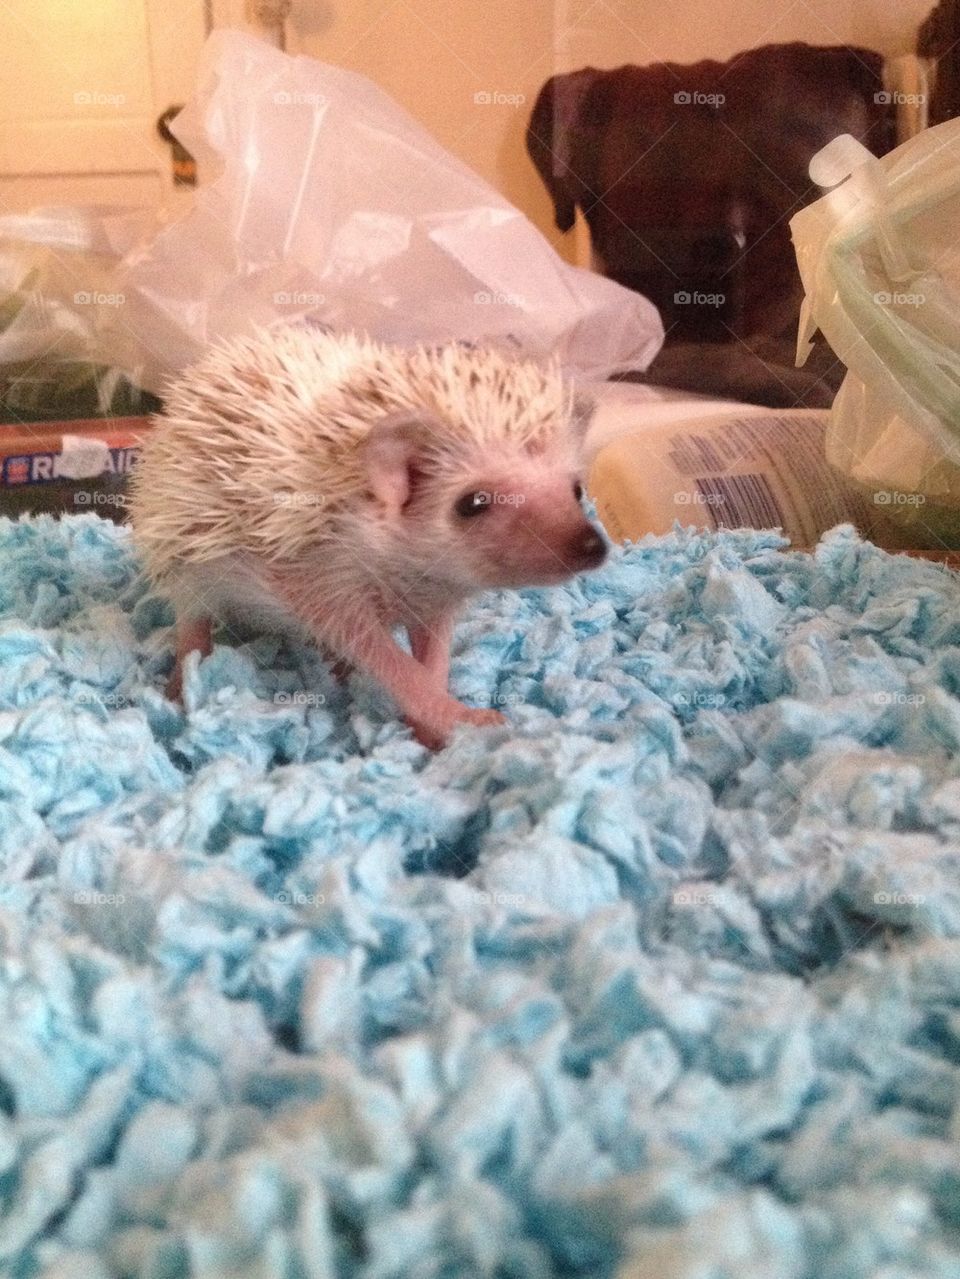 Lincoln the hedgie 